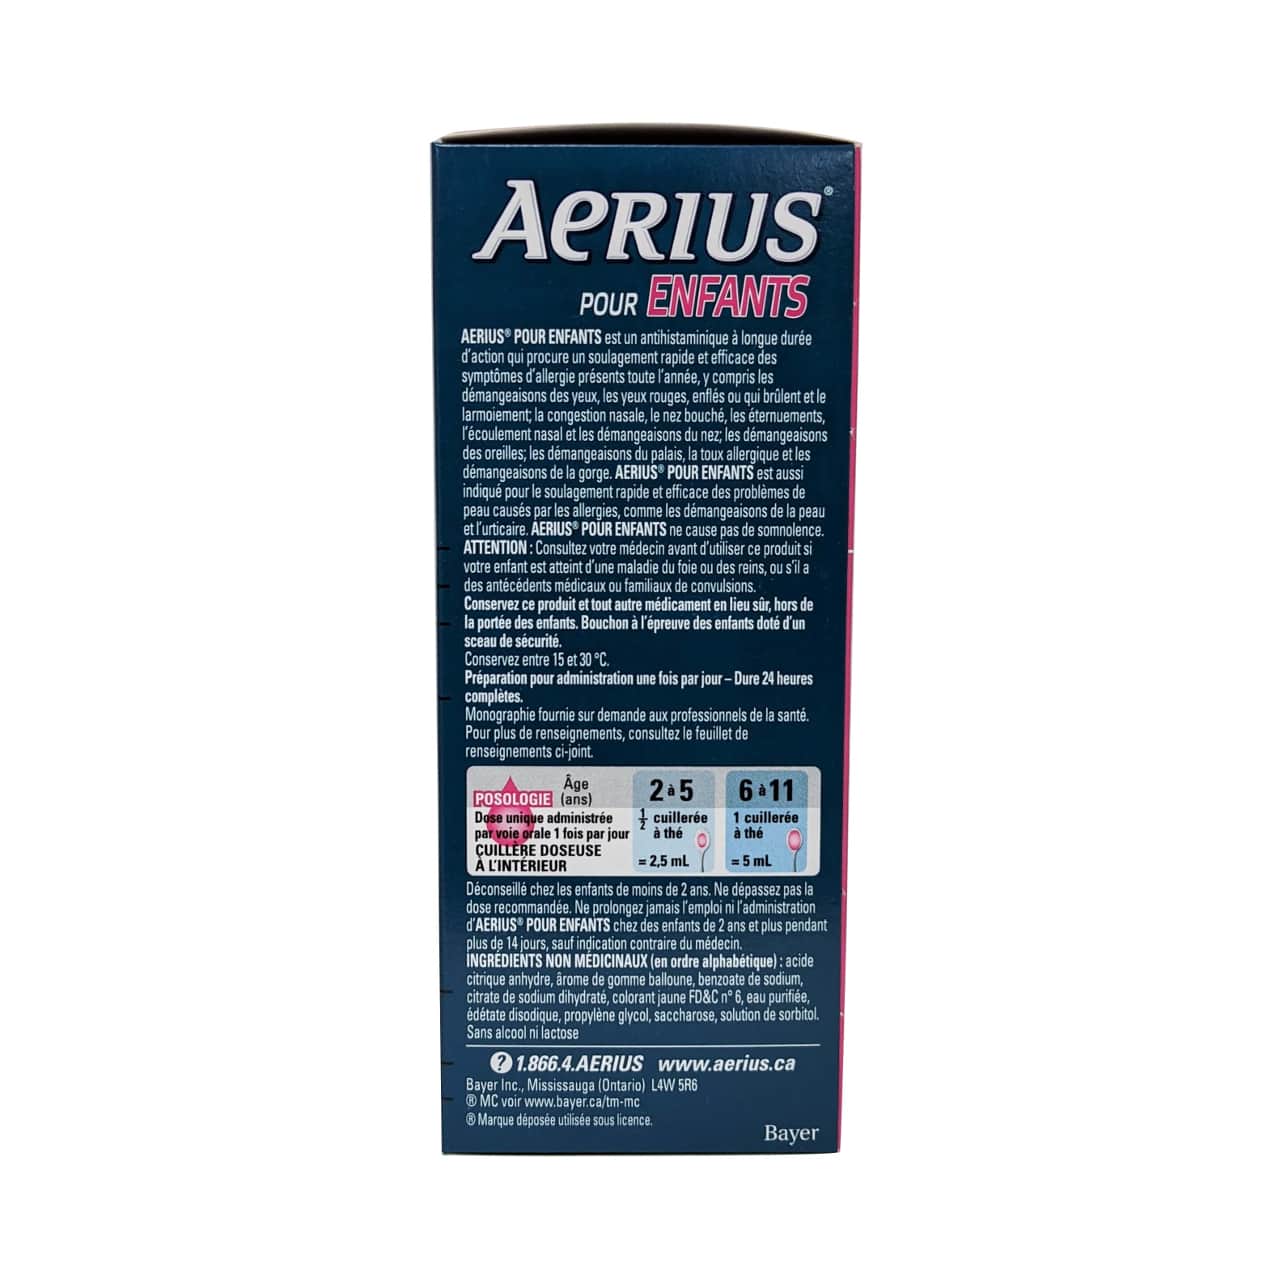 French product details, dosage, ingredients, and warnings for Aerius Kids Desloratadine Syrup 0.5mg / 5mL (Bubble Gum Flavour)